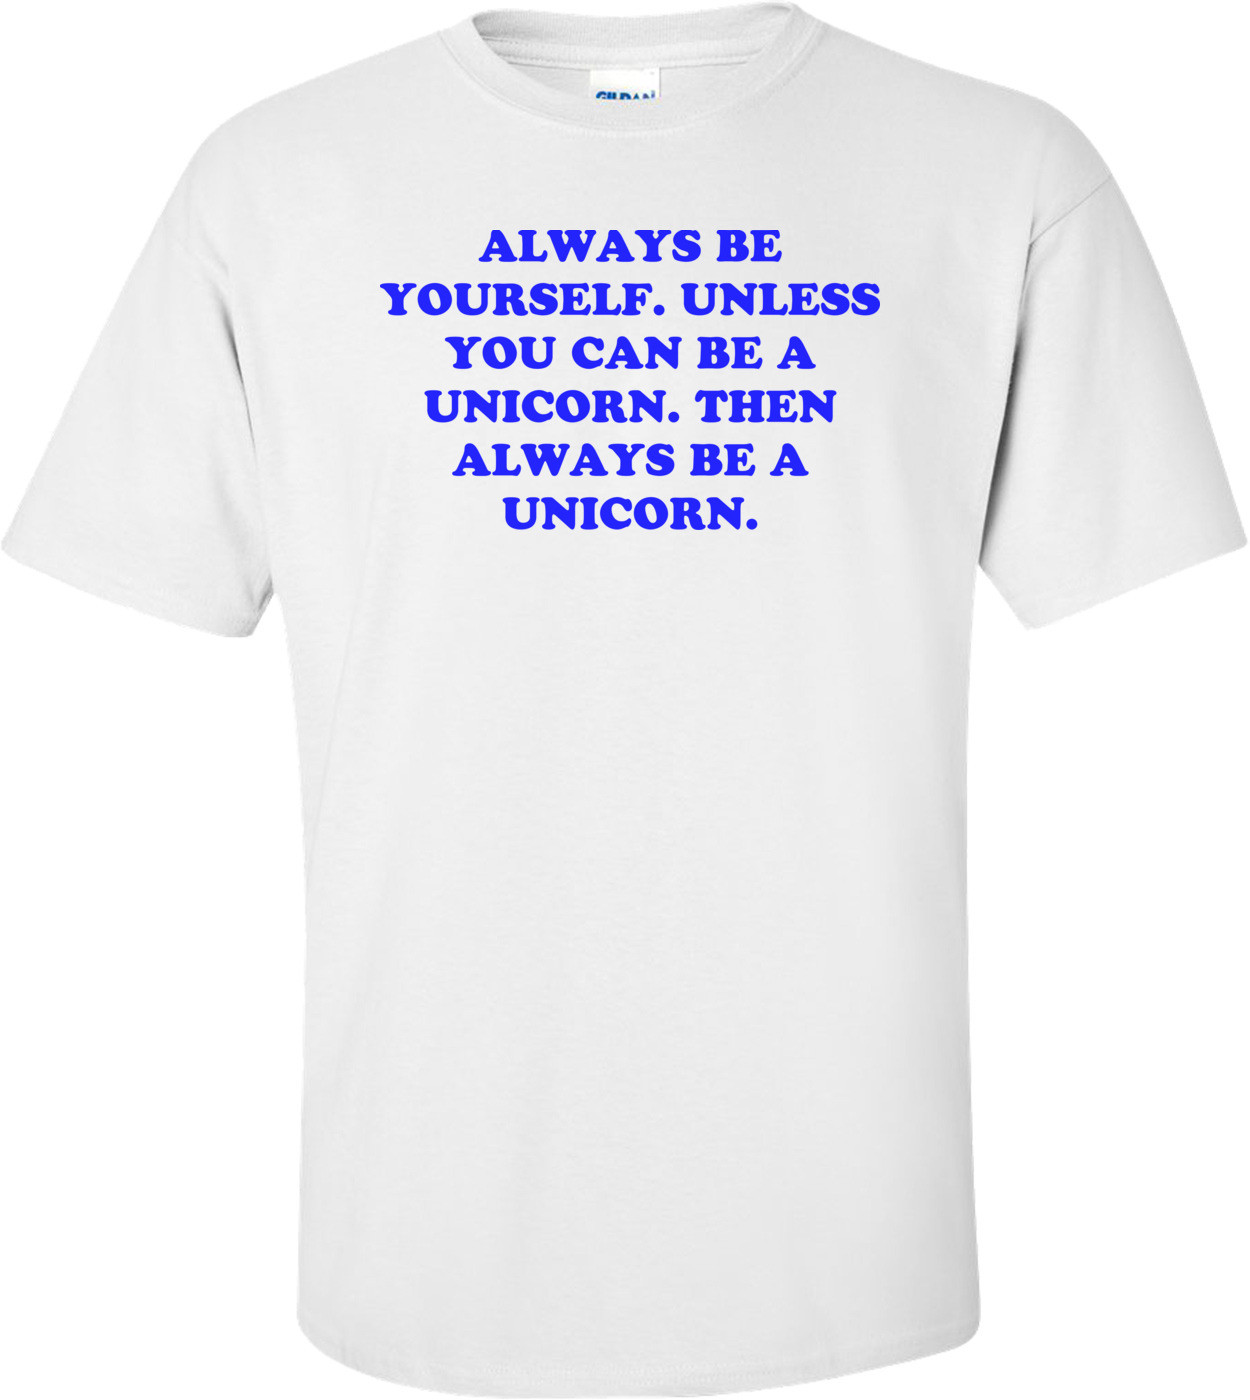 Always Be Yourself. Unless You Can Be A Unicorn. Then Always Be A Unicorn. Shirt